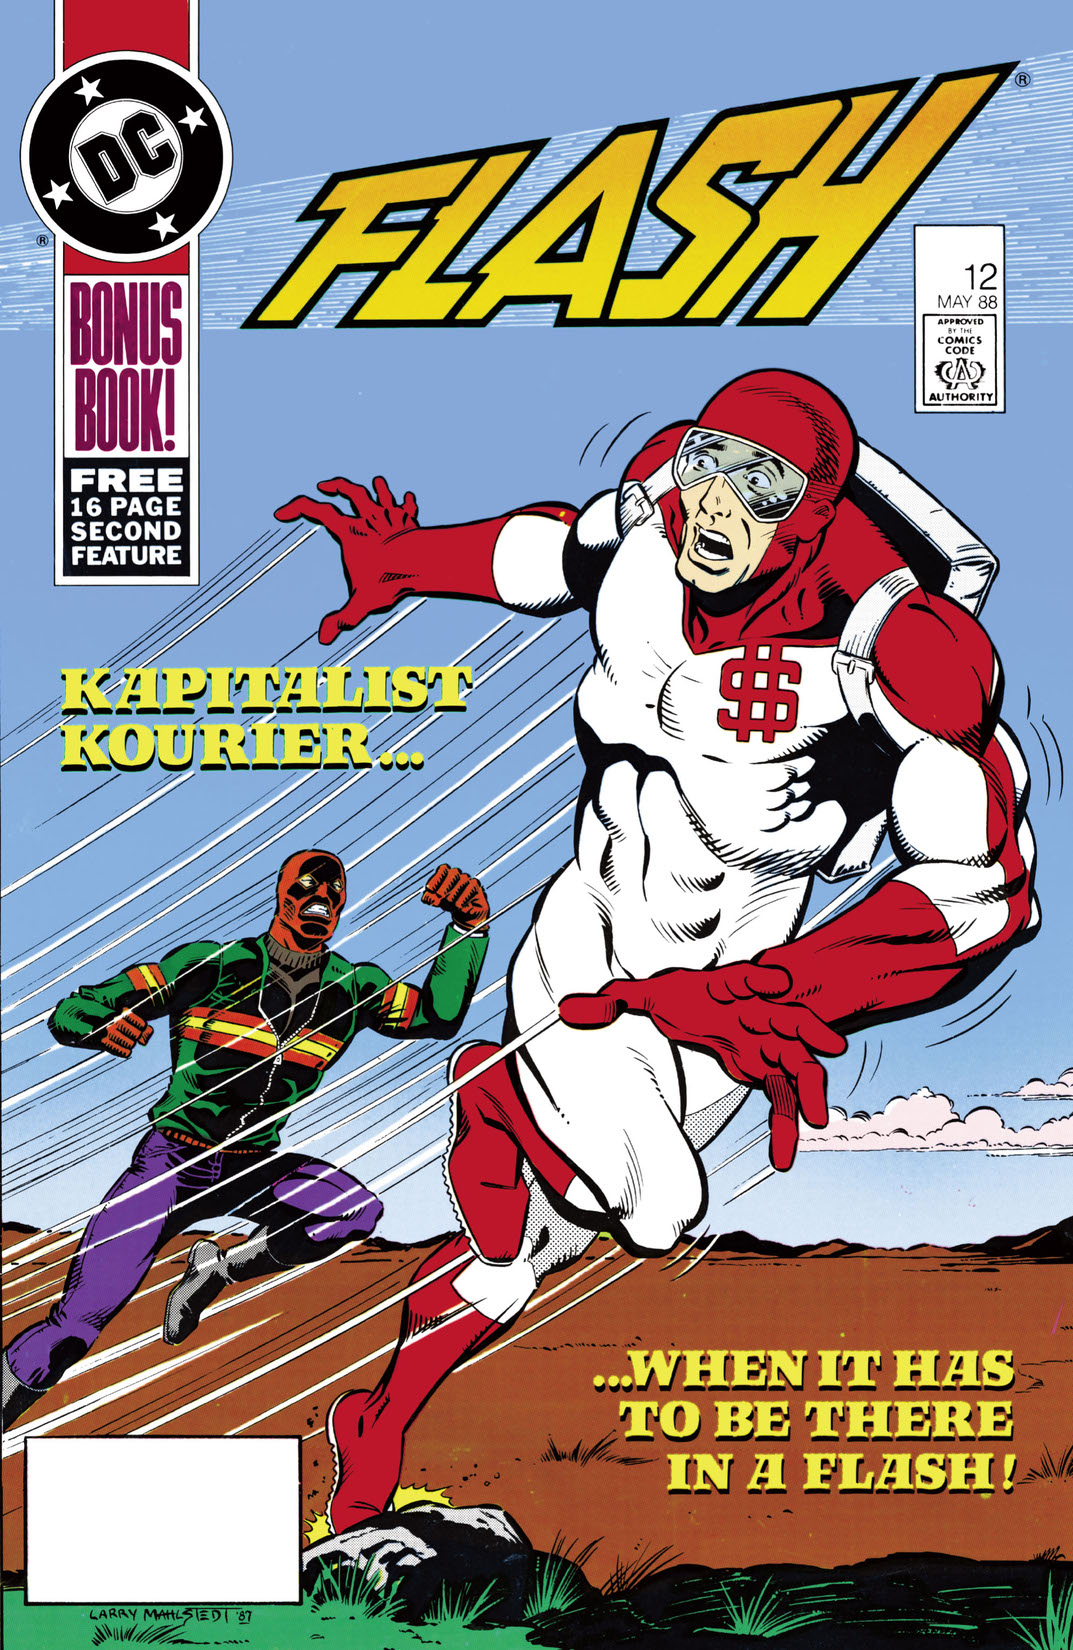 The Flash (1987-) #12 preview images